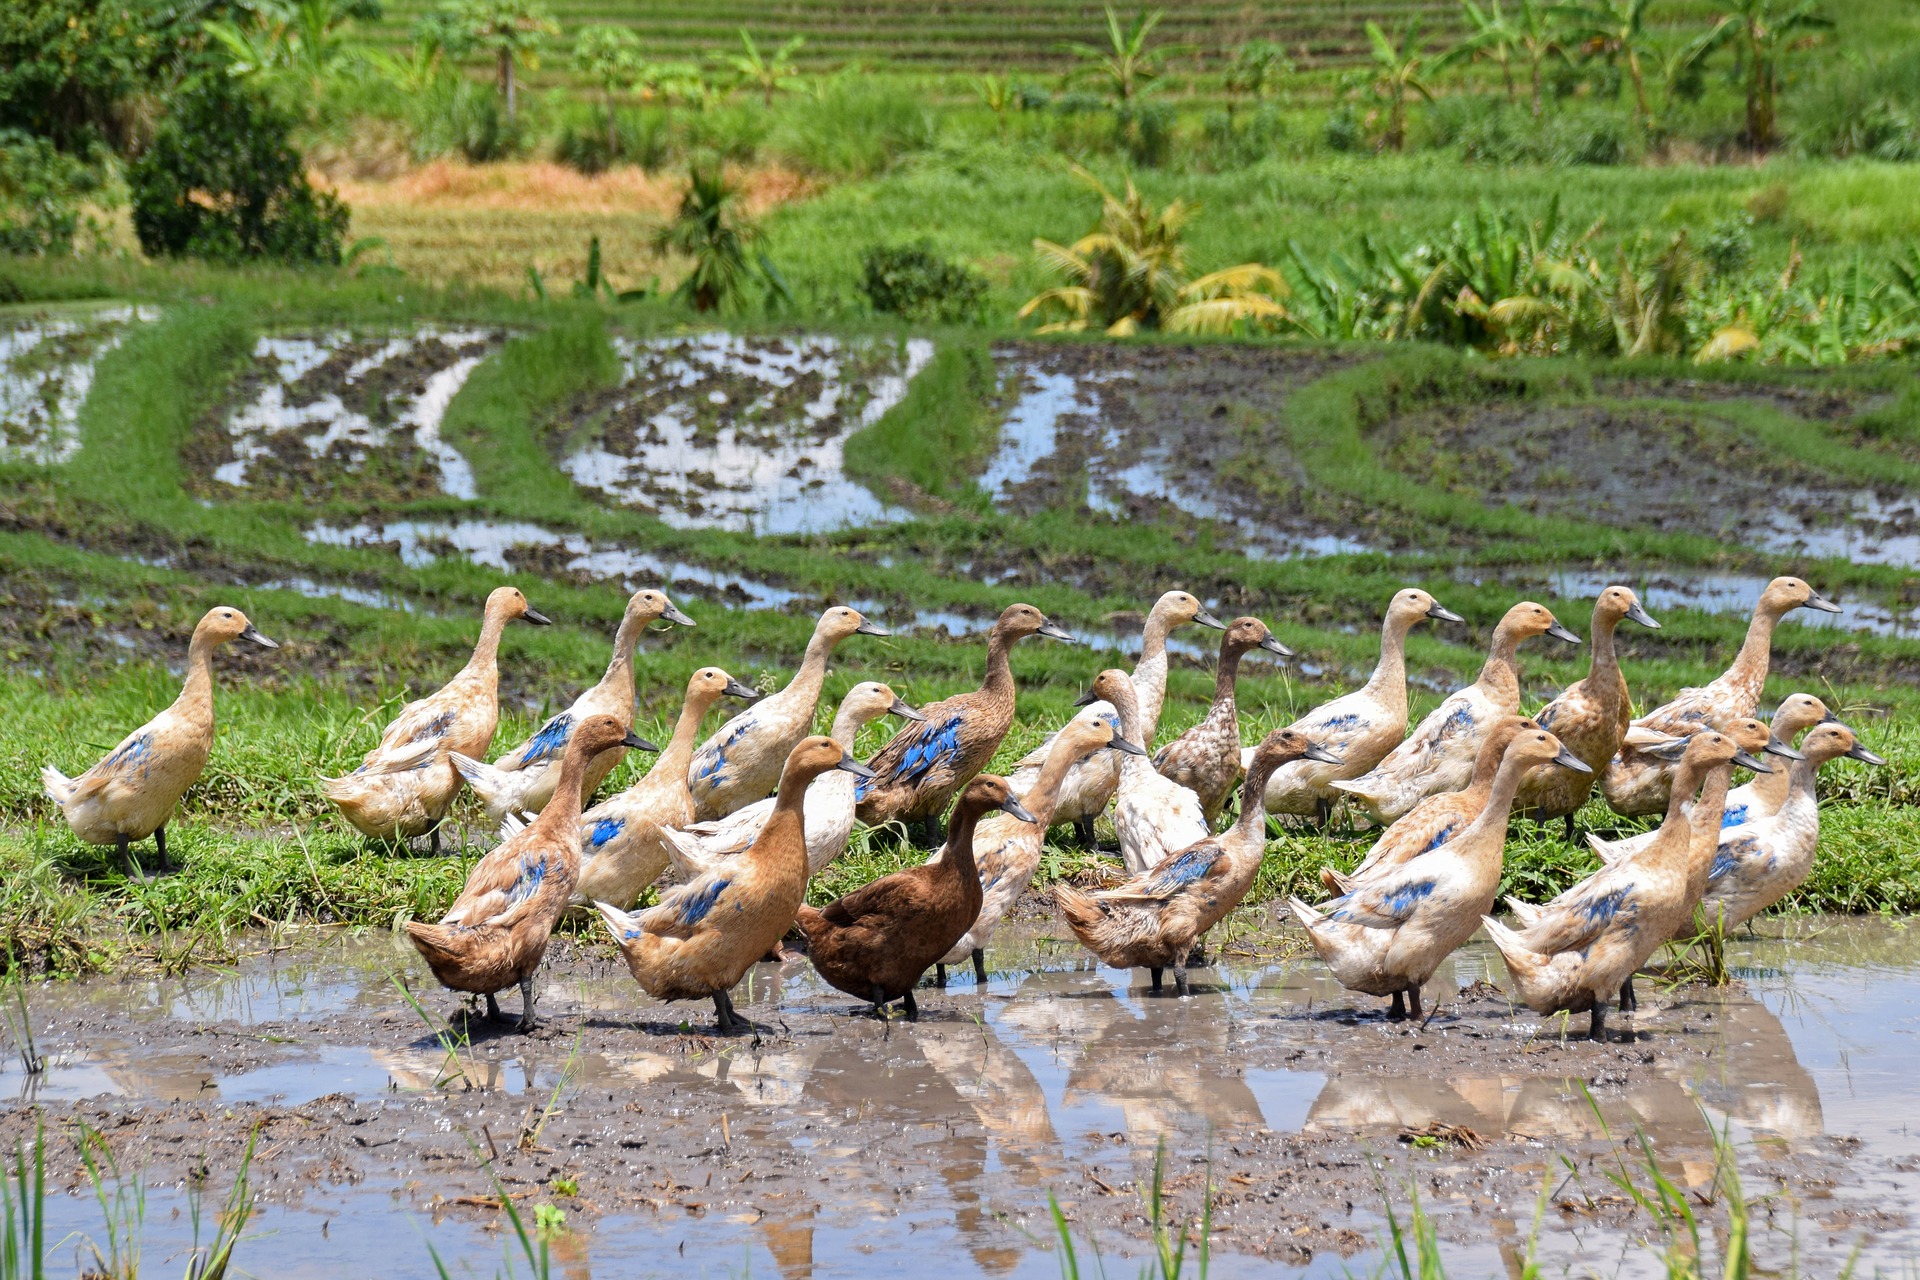 The only disadvantage (for the ducks) is that after a season of eating the weeds, the ducks need to be slaughtered for meat. They get too fat and begin to harm the plants. The farmer needs to change ducks every rice season.